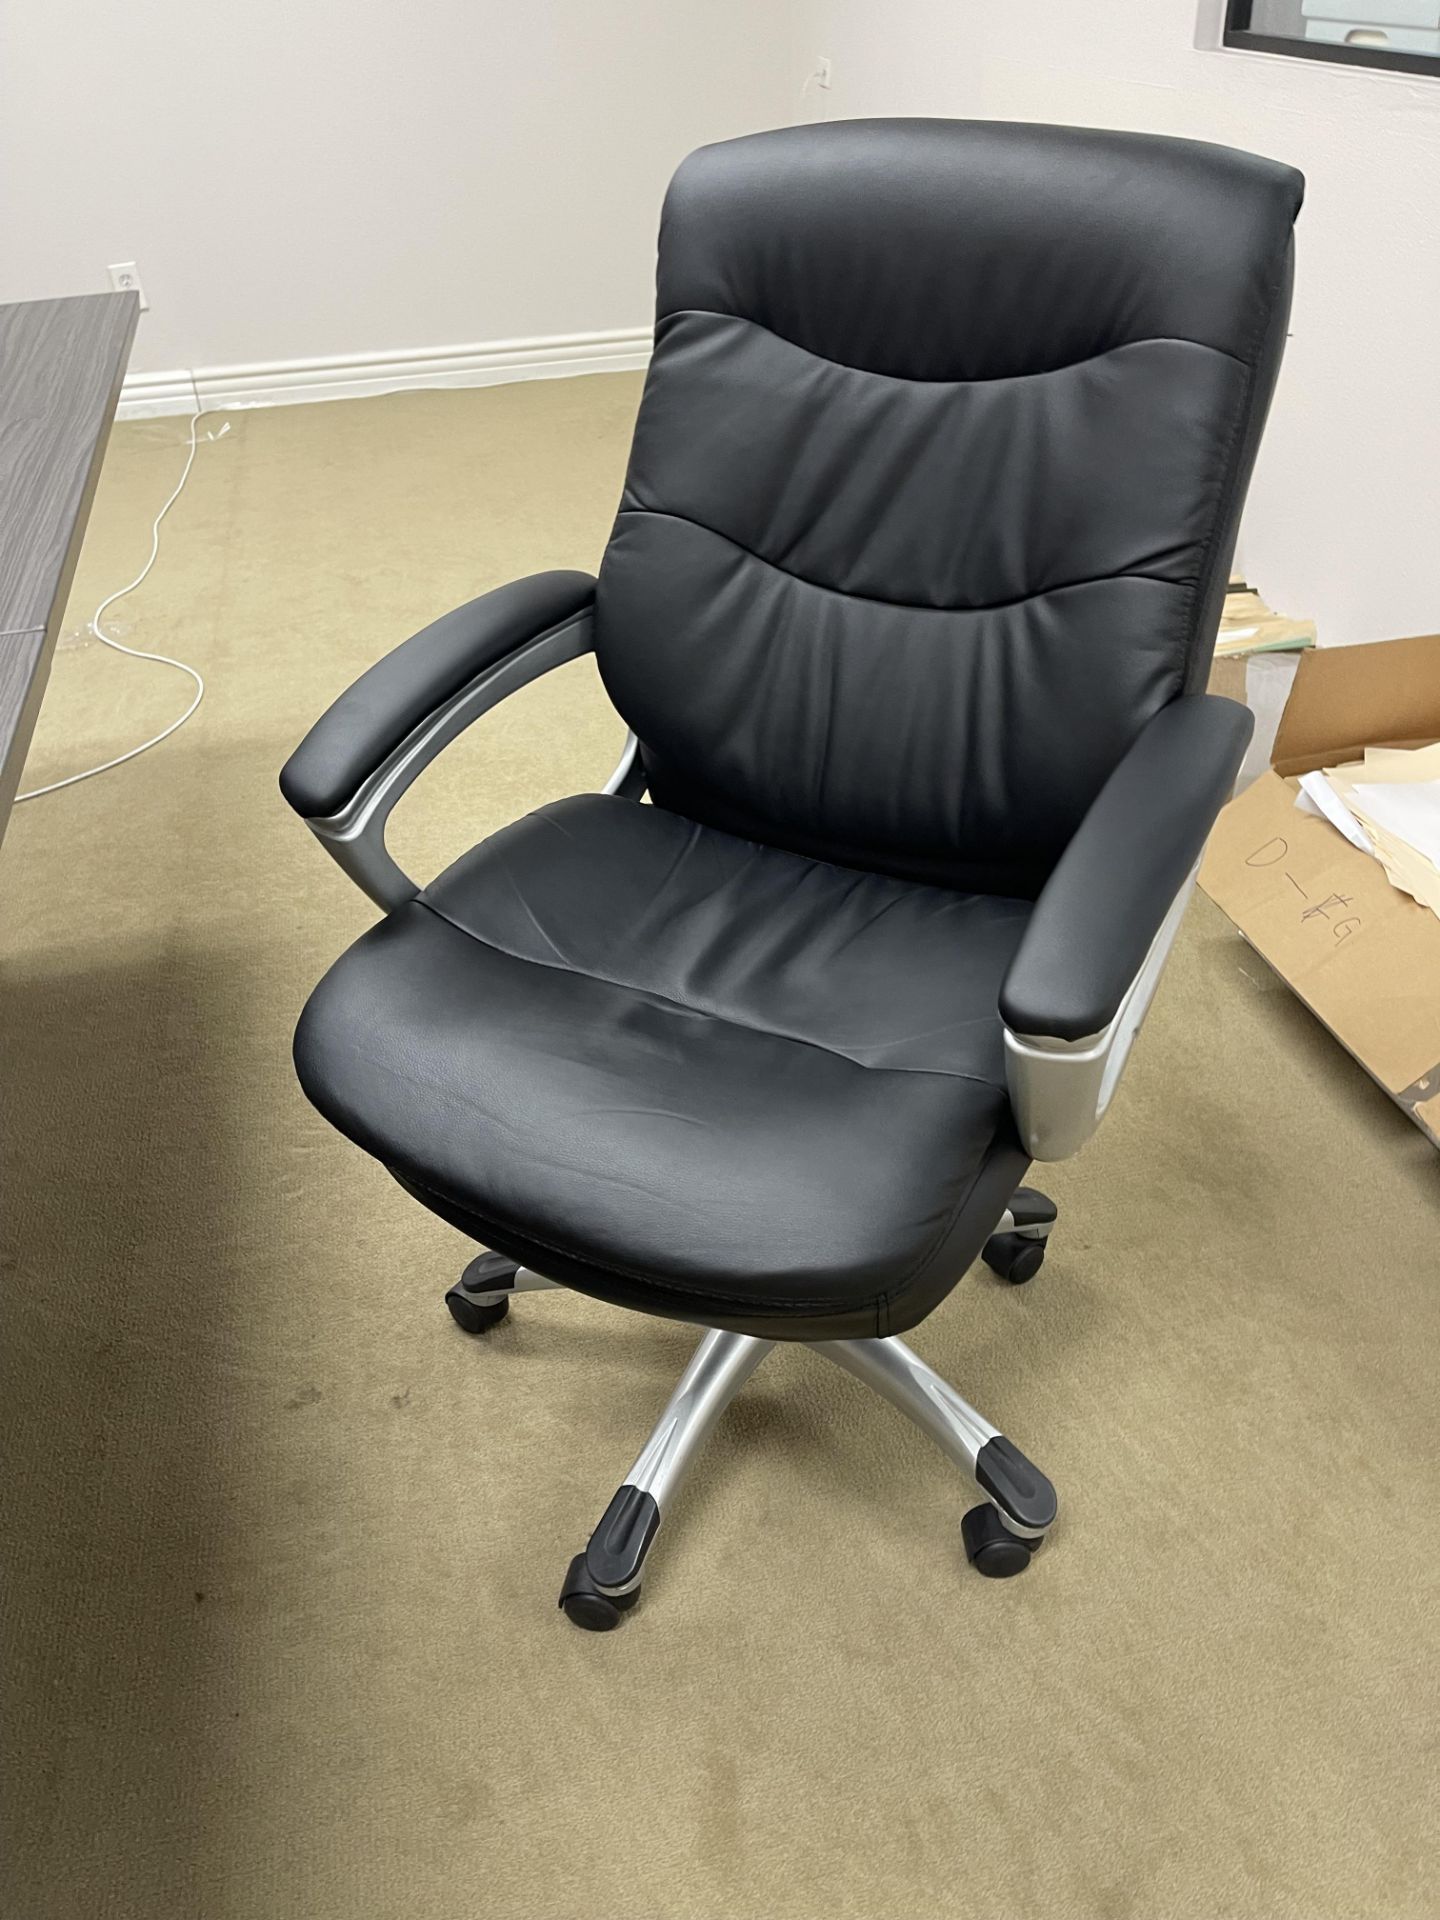 BLACK OFFICE CHAIRS - Image 3 of 3